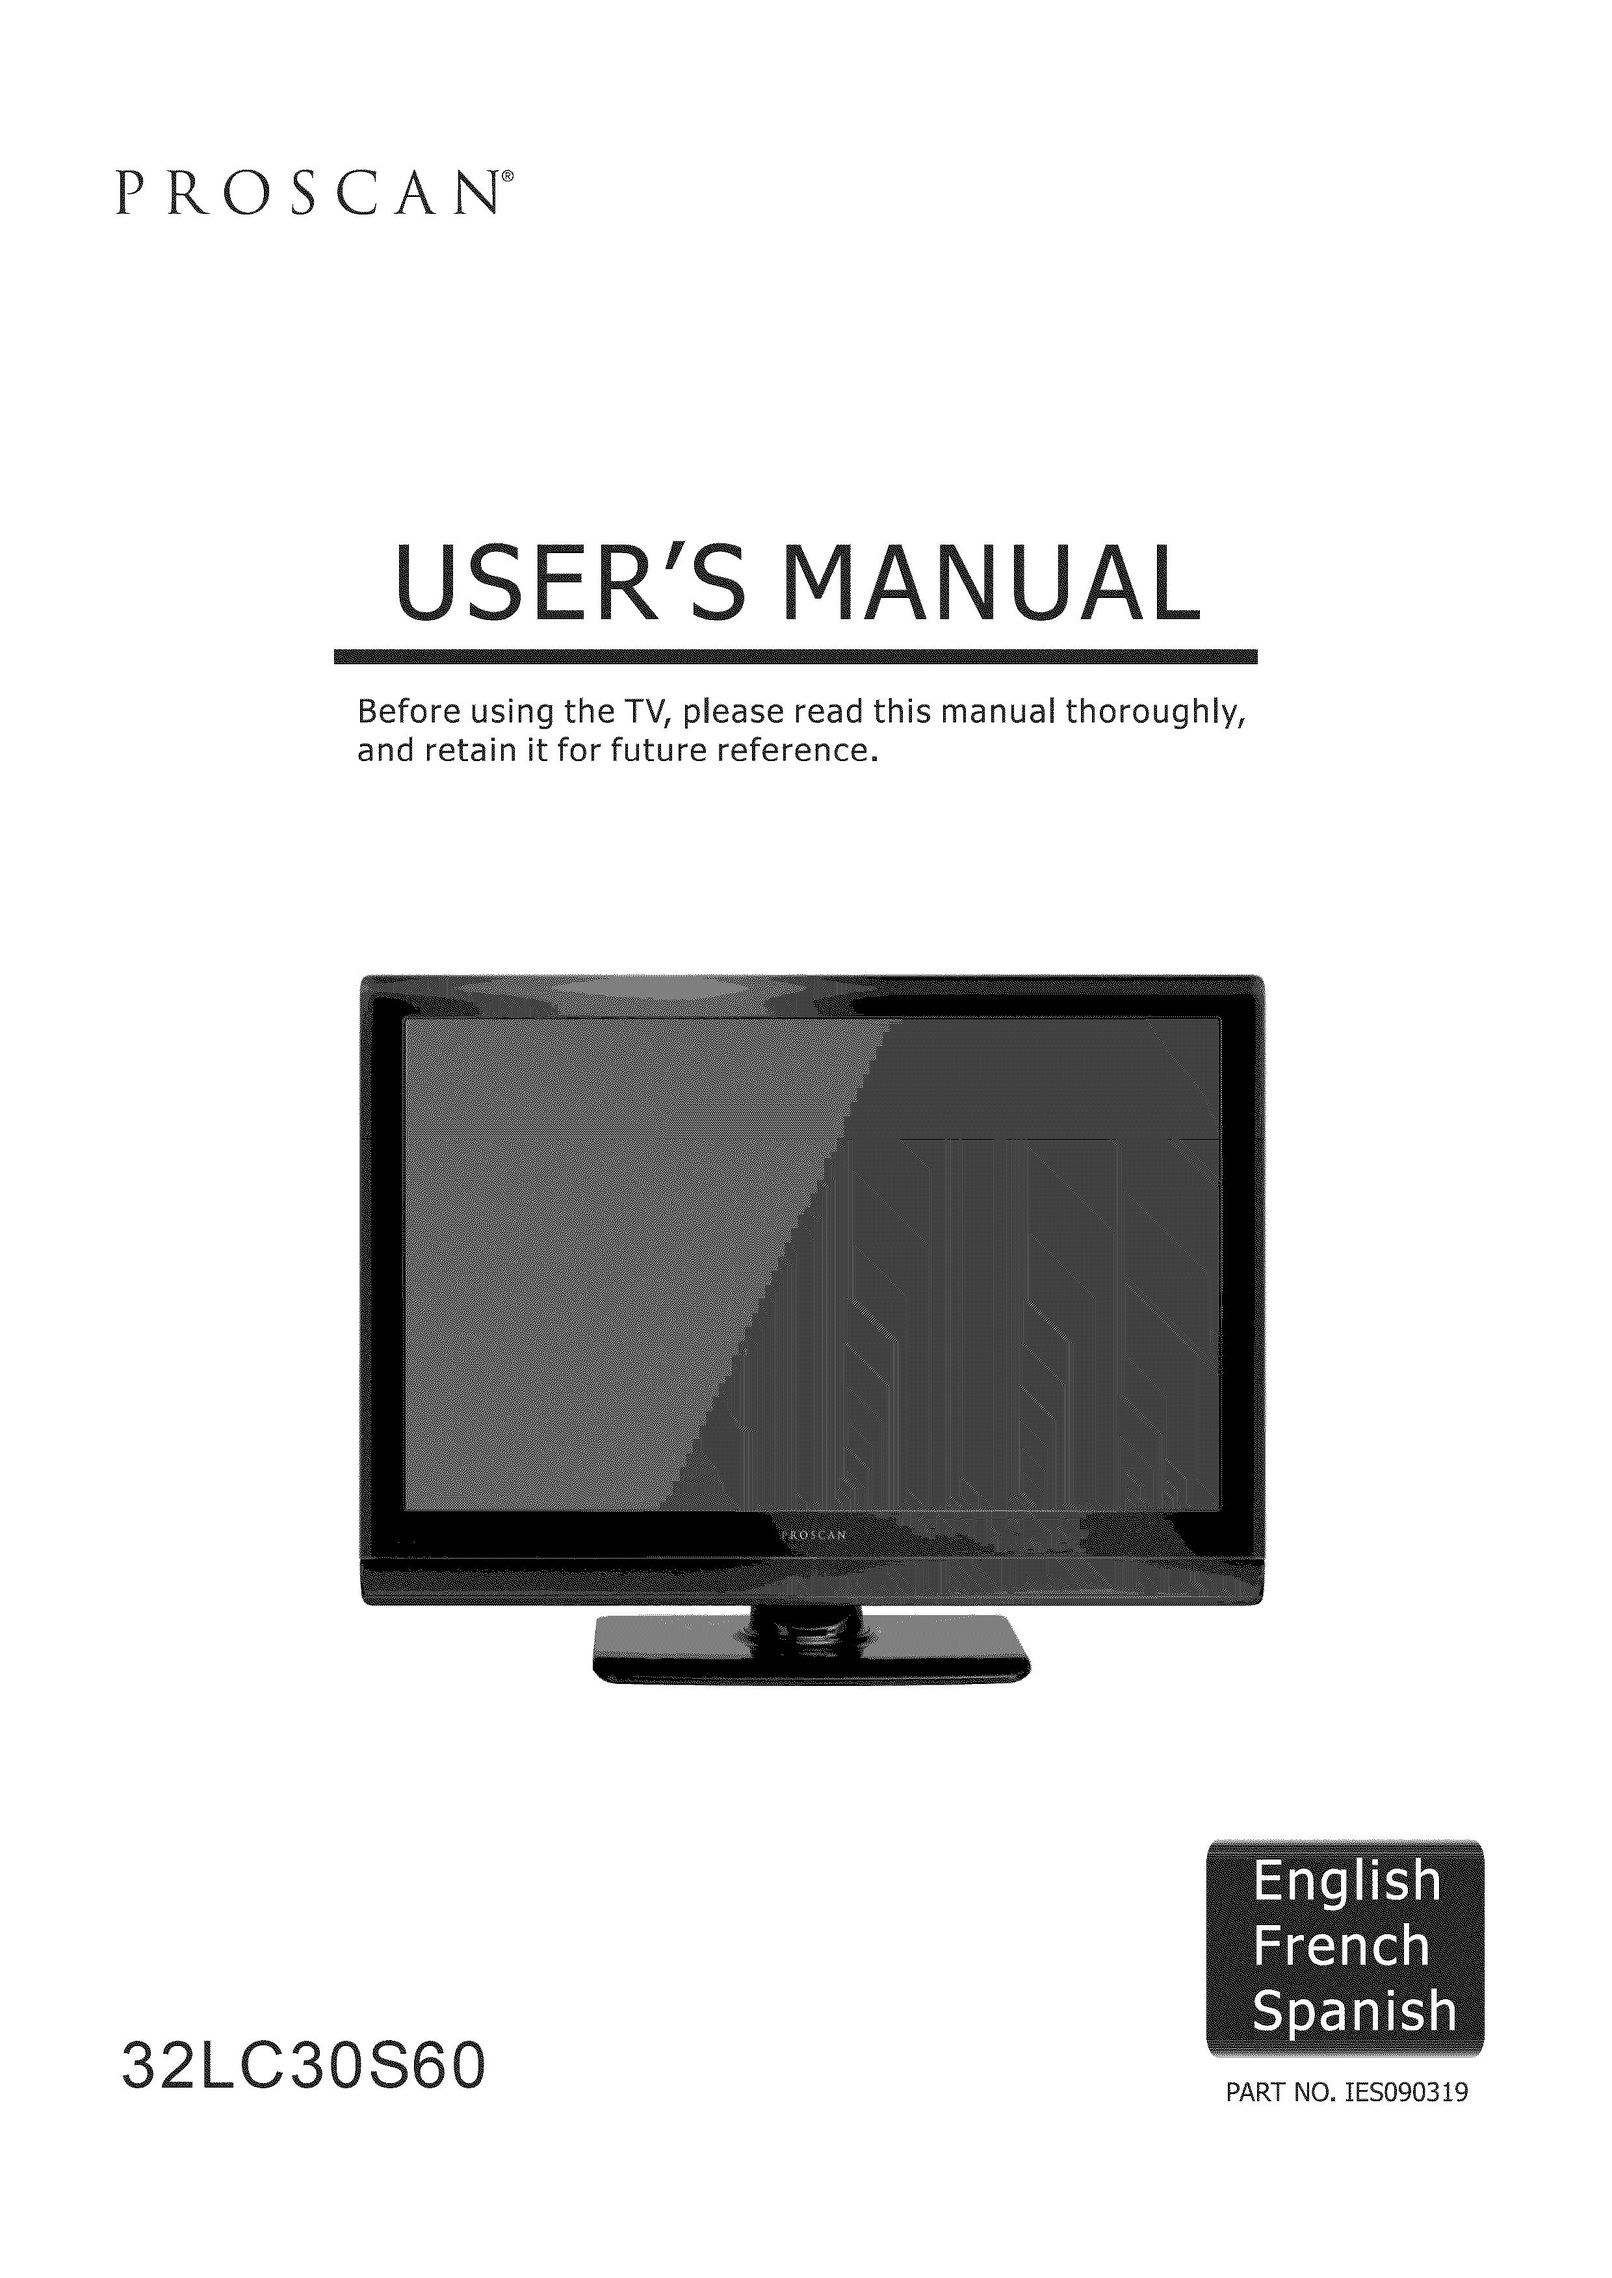 ProScan 32LC30S60 Flat Panel Television User Manual